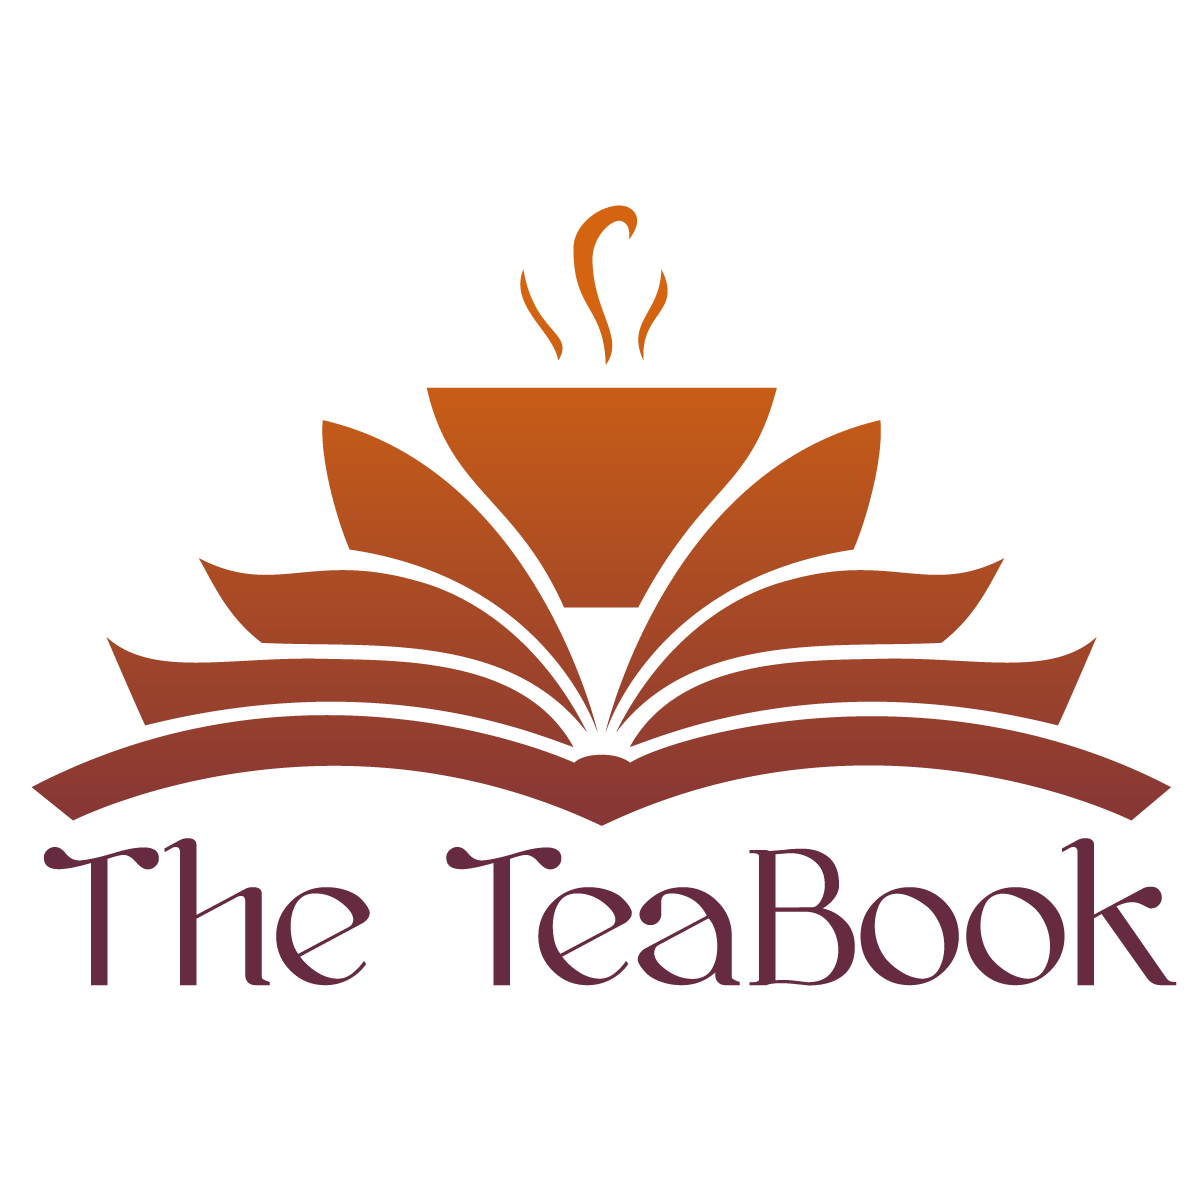 The TeaBook Logo